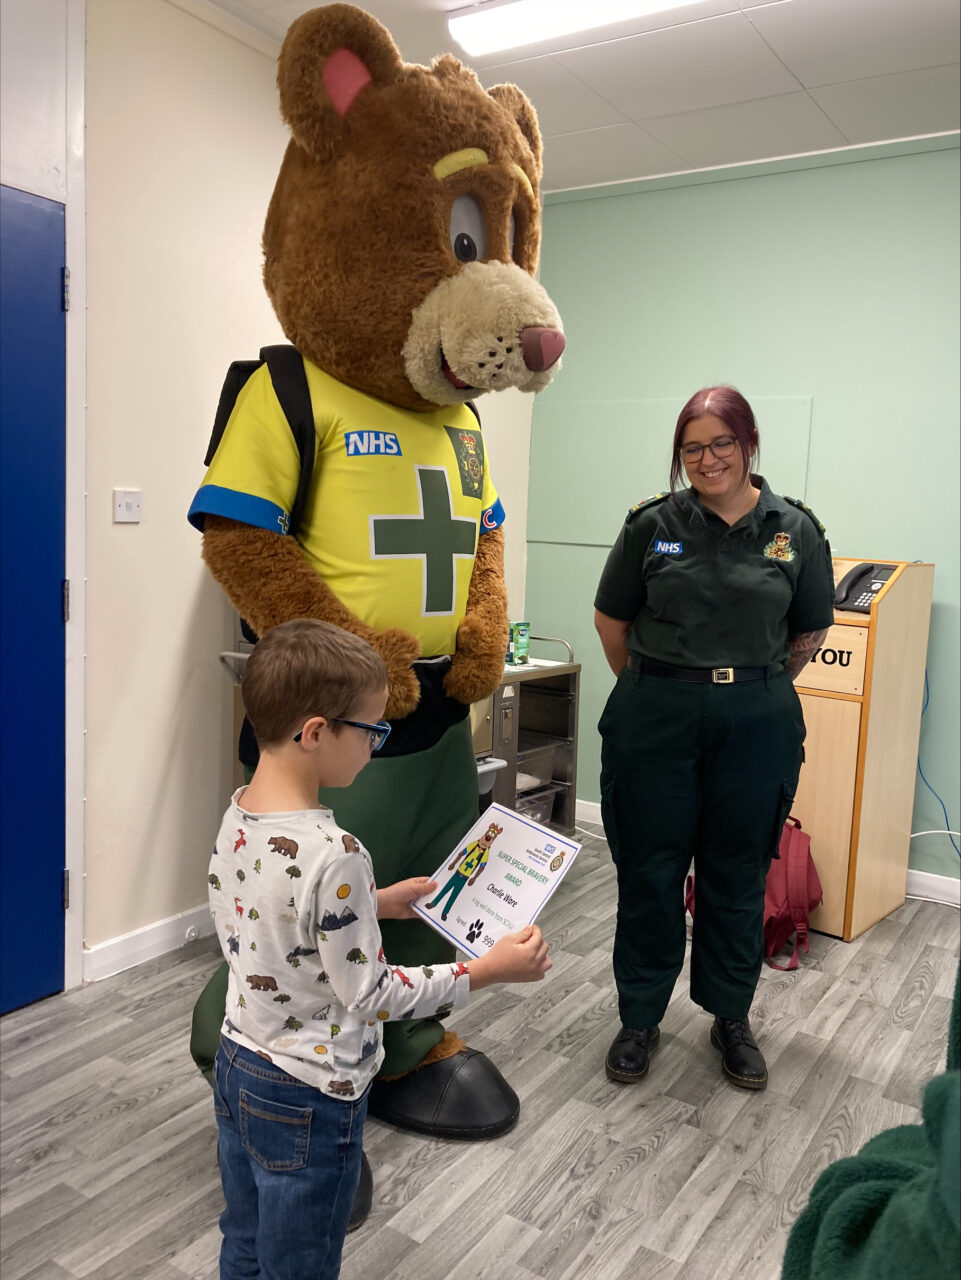 A young boy receives a certificate from an ambulance worker and bear mascot